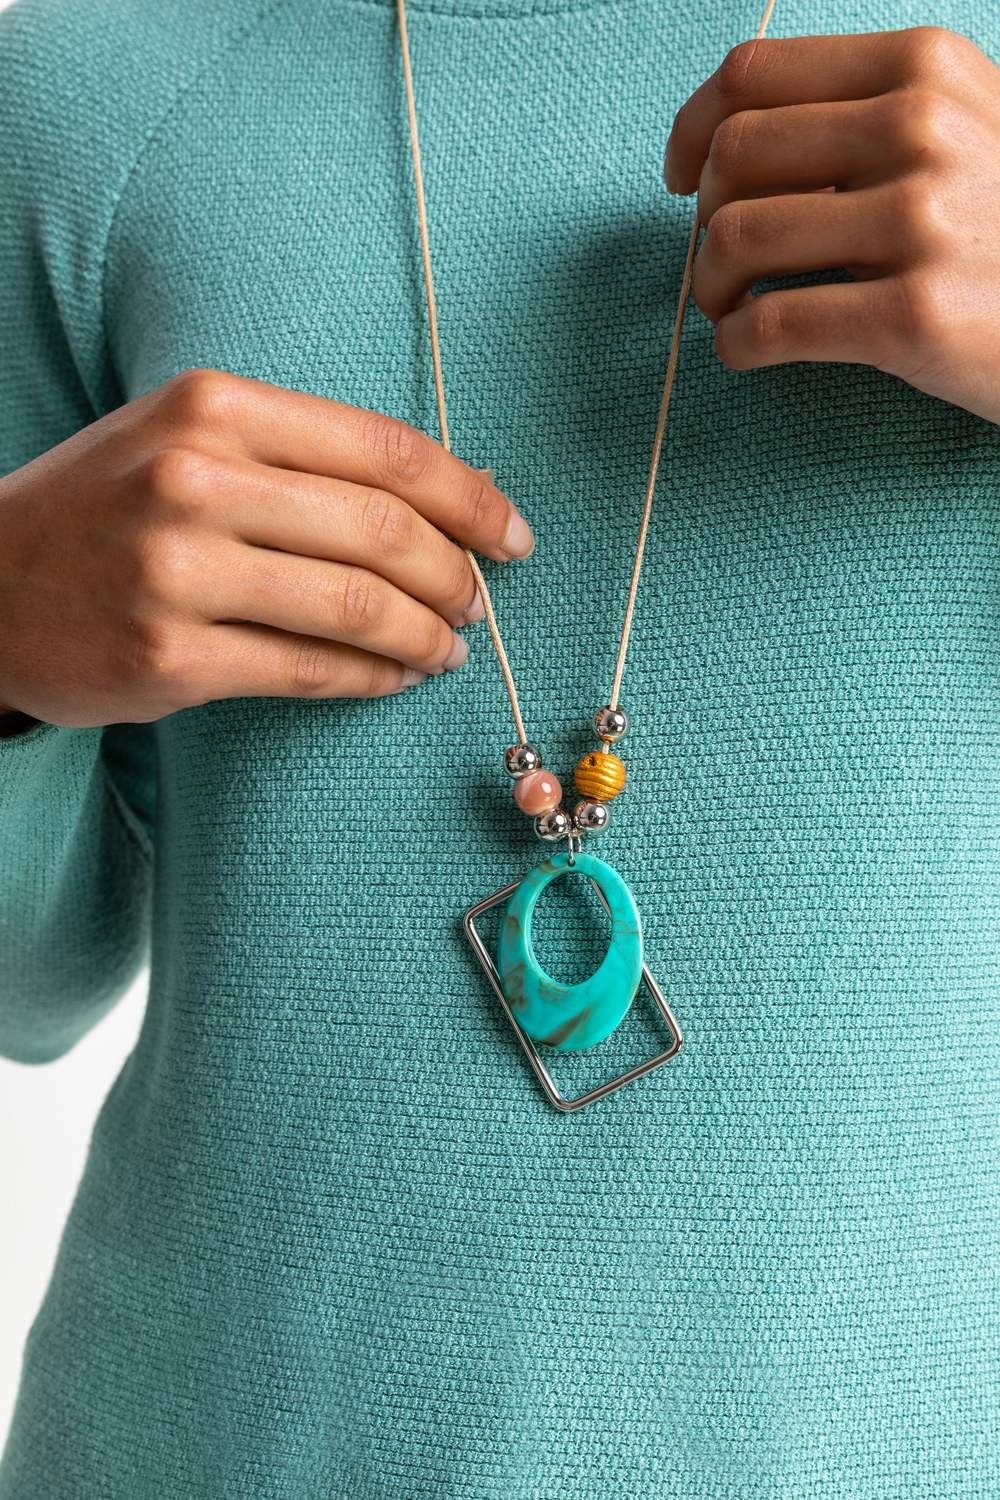 Mint Soft Jersey Sweatshirt with Necklace, Image 5 of 5